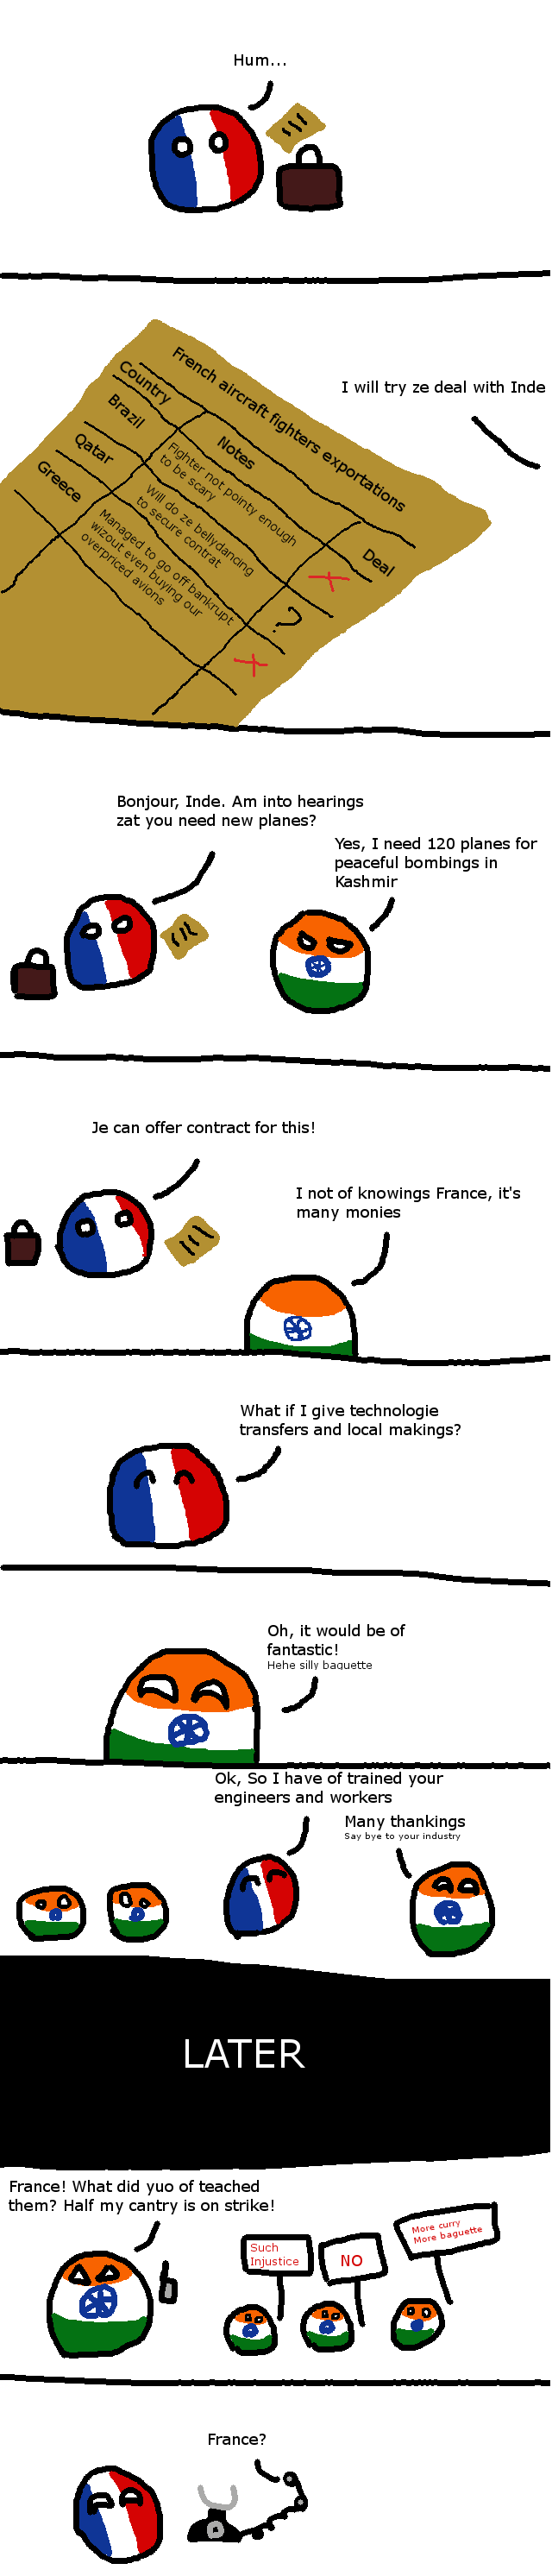 French technology backfires